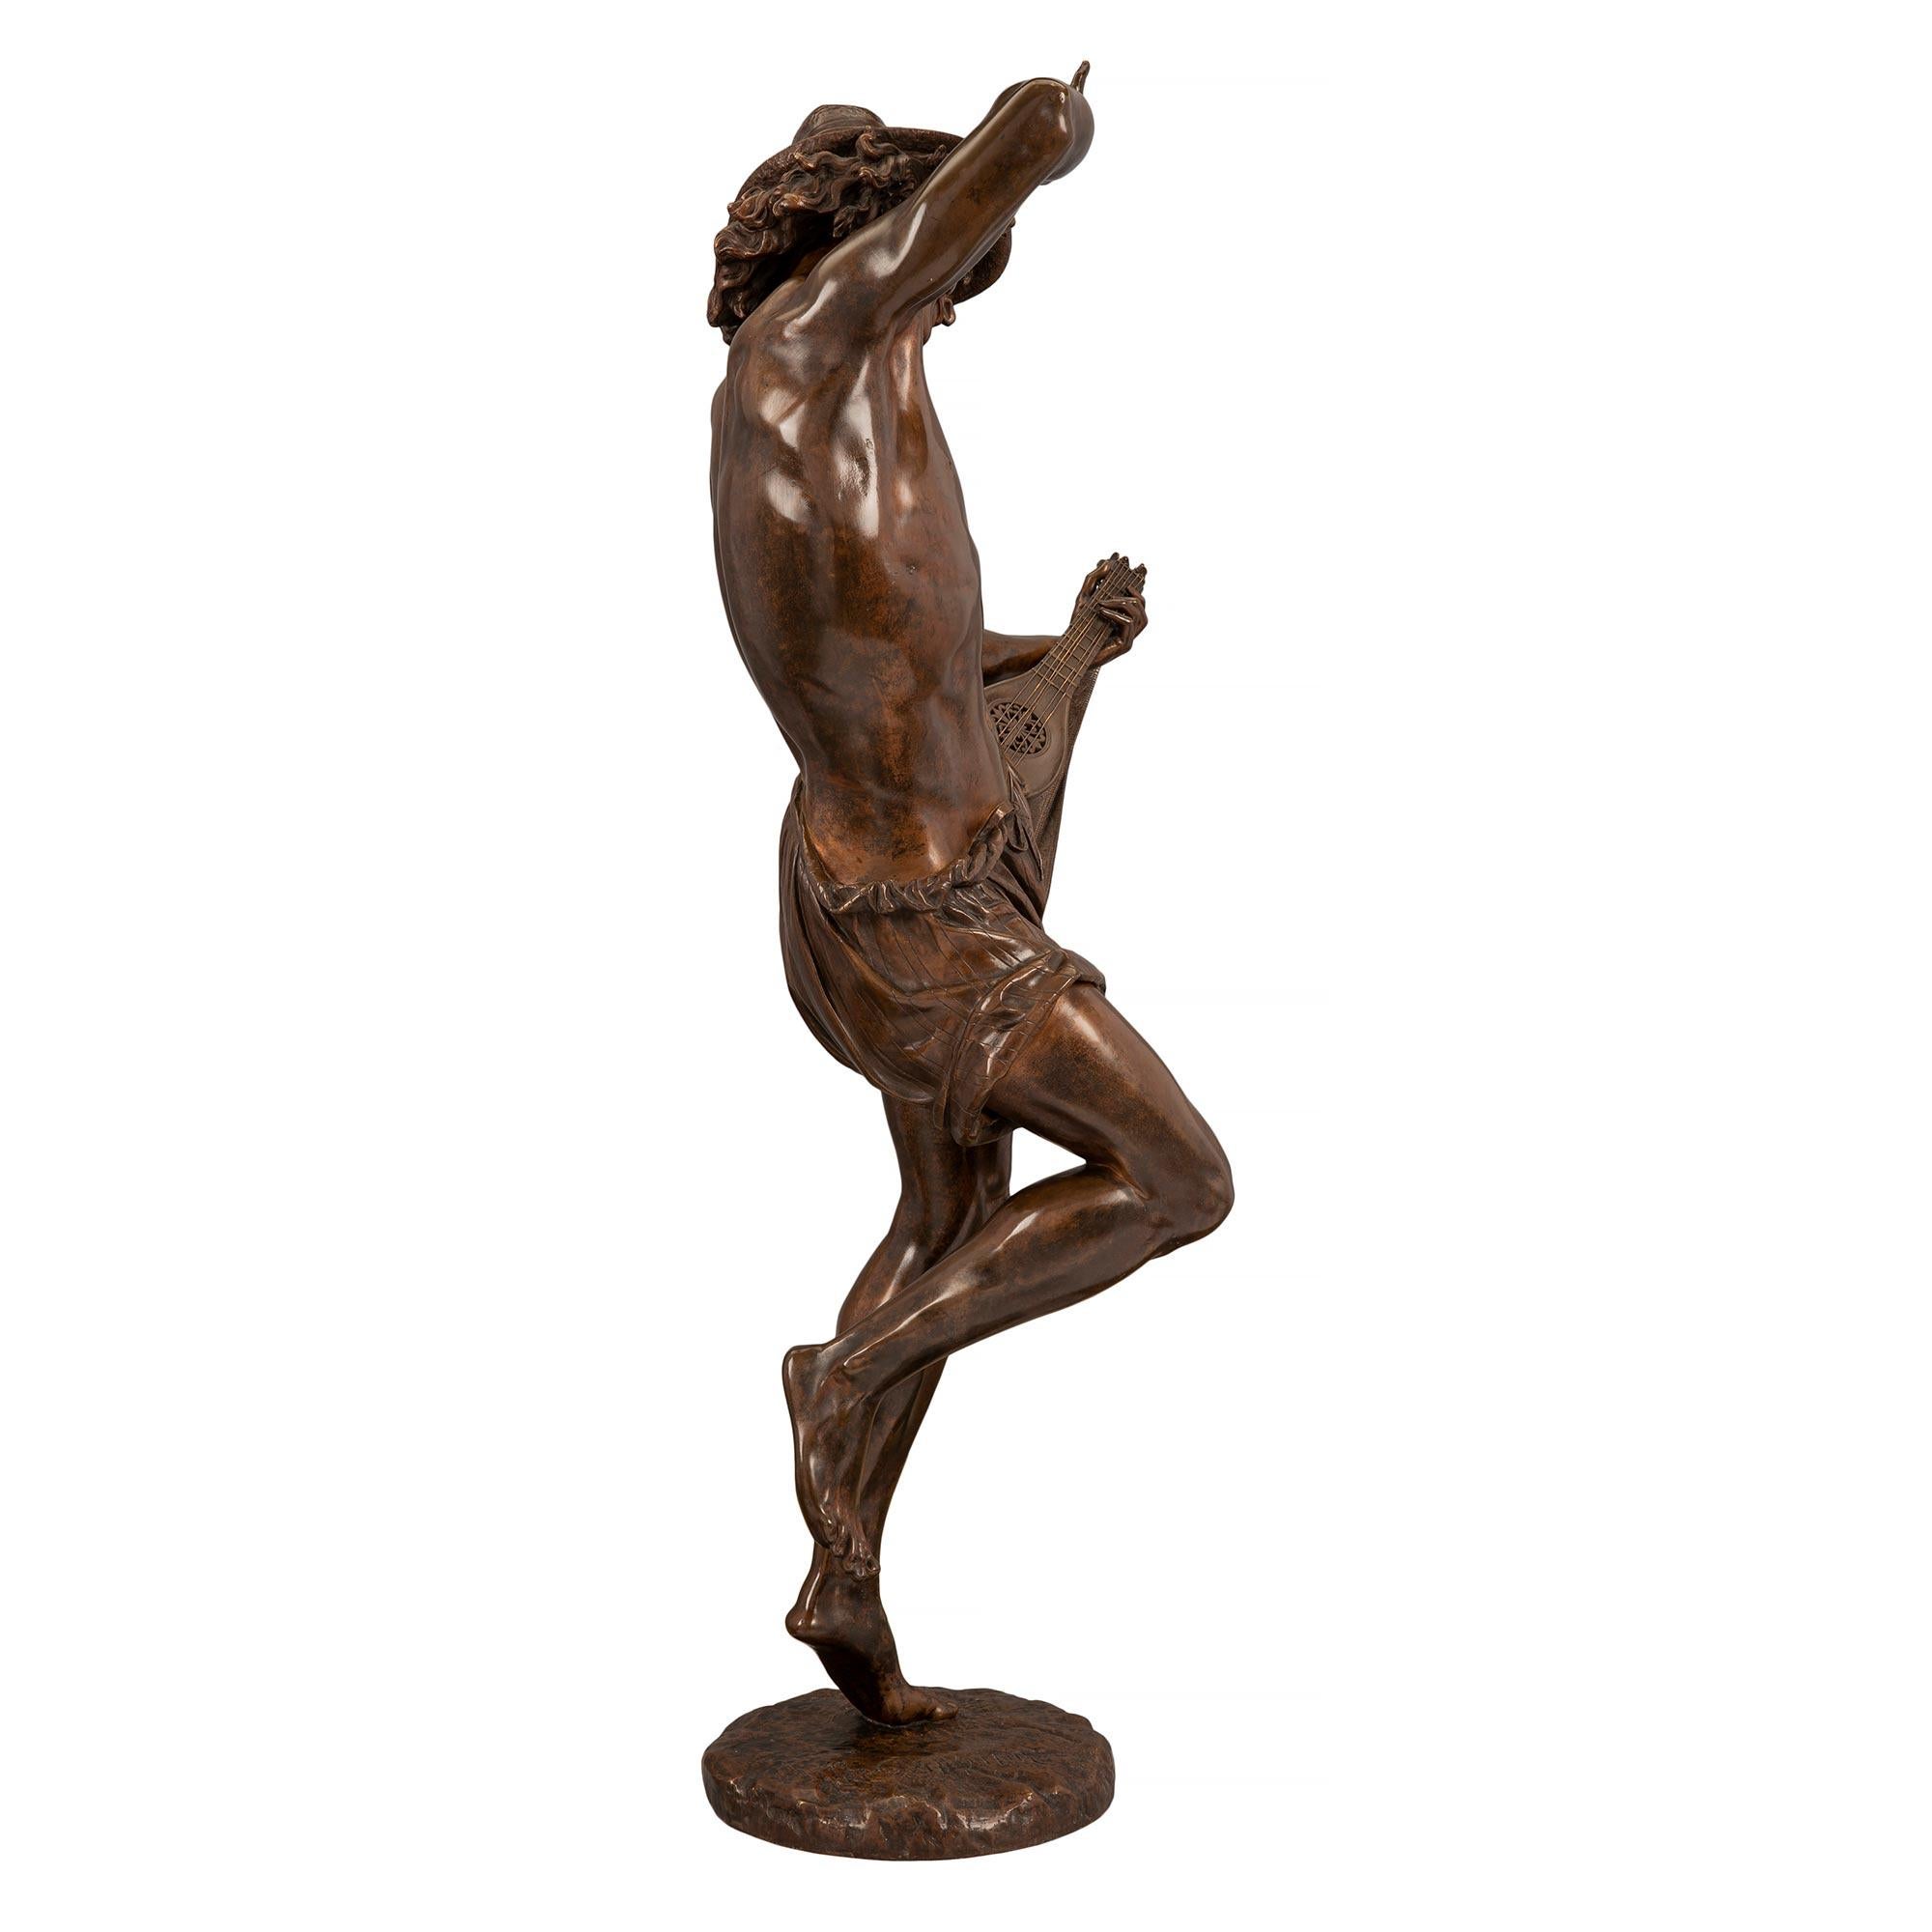 A stunning and high quality French 19th century Belle Époque period patinated bronze statue of a man dancing and playing a mandolin. The statue is raised by a circular base with a terrain design where the charming young man is dancing. He is wearing